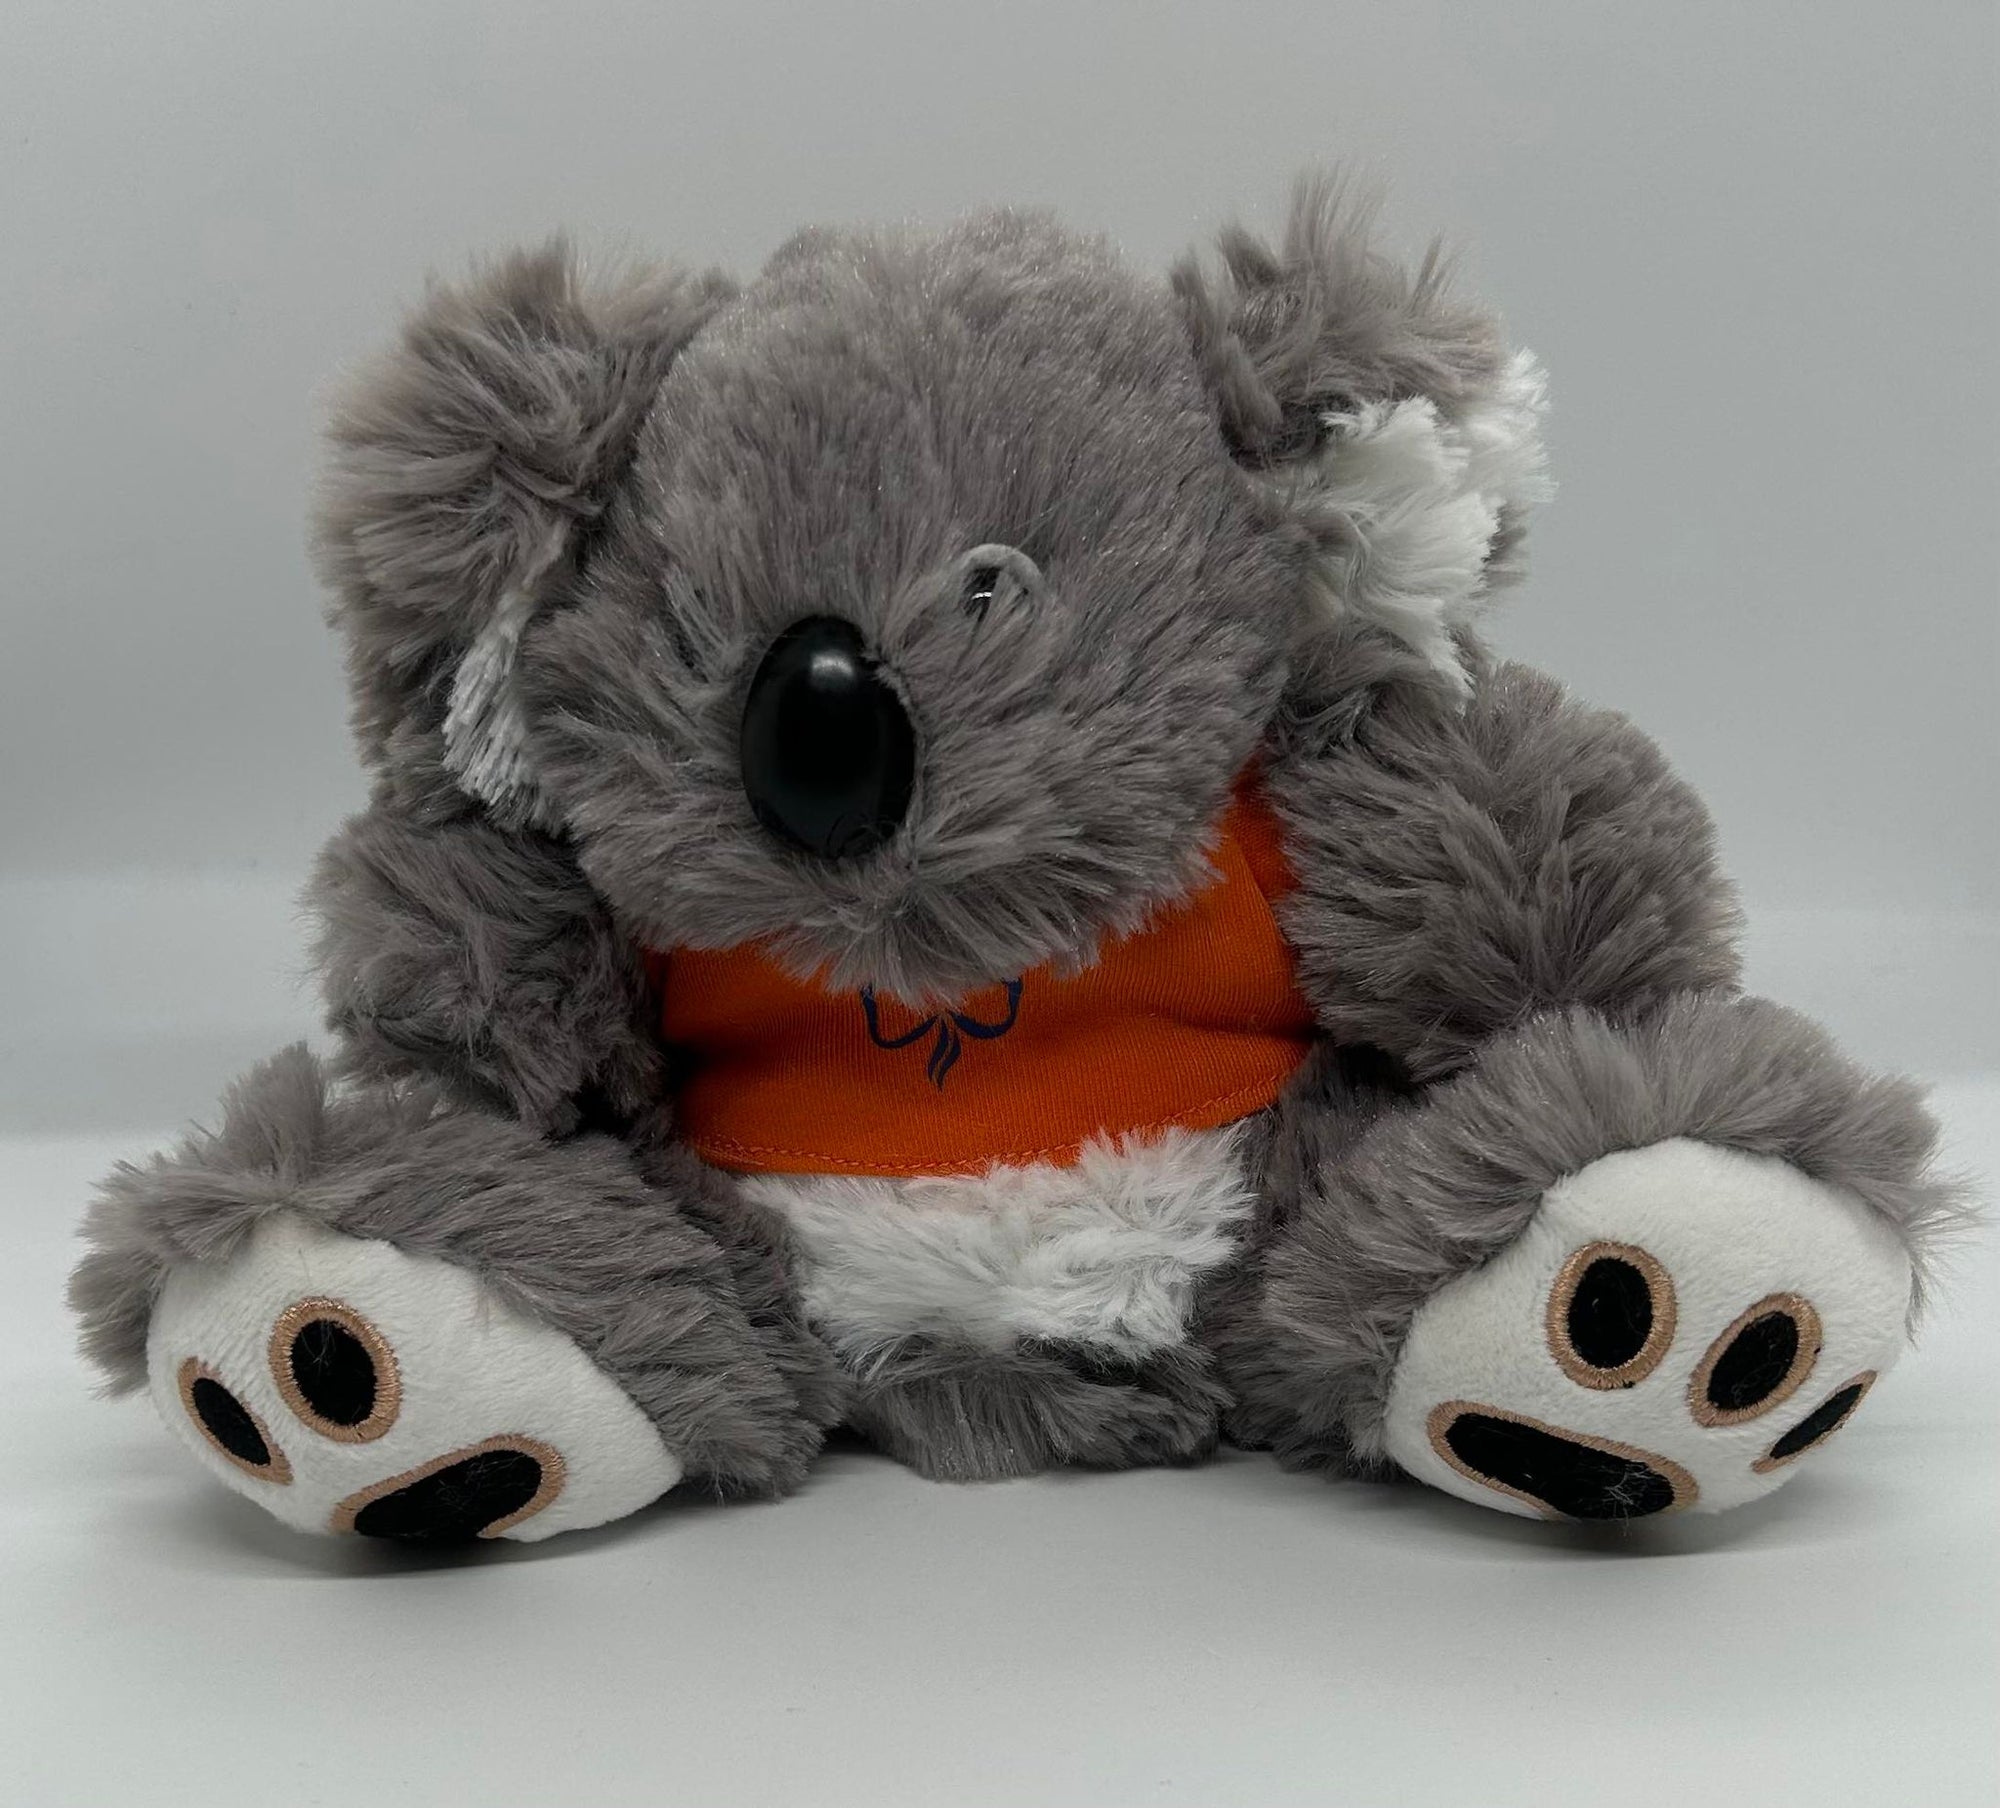 a small grey koala stuffed toy with an orange t-shirt on with a blue trefoil